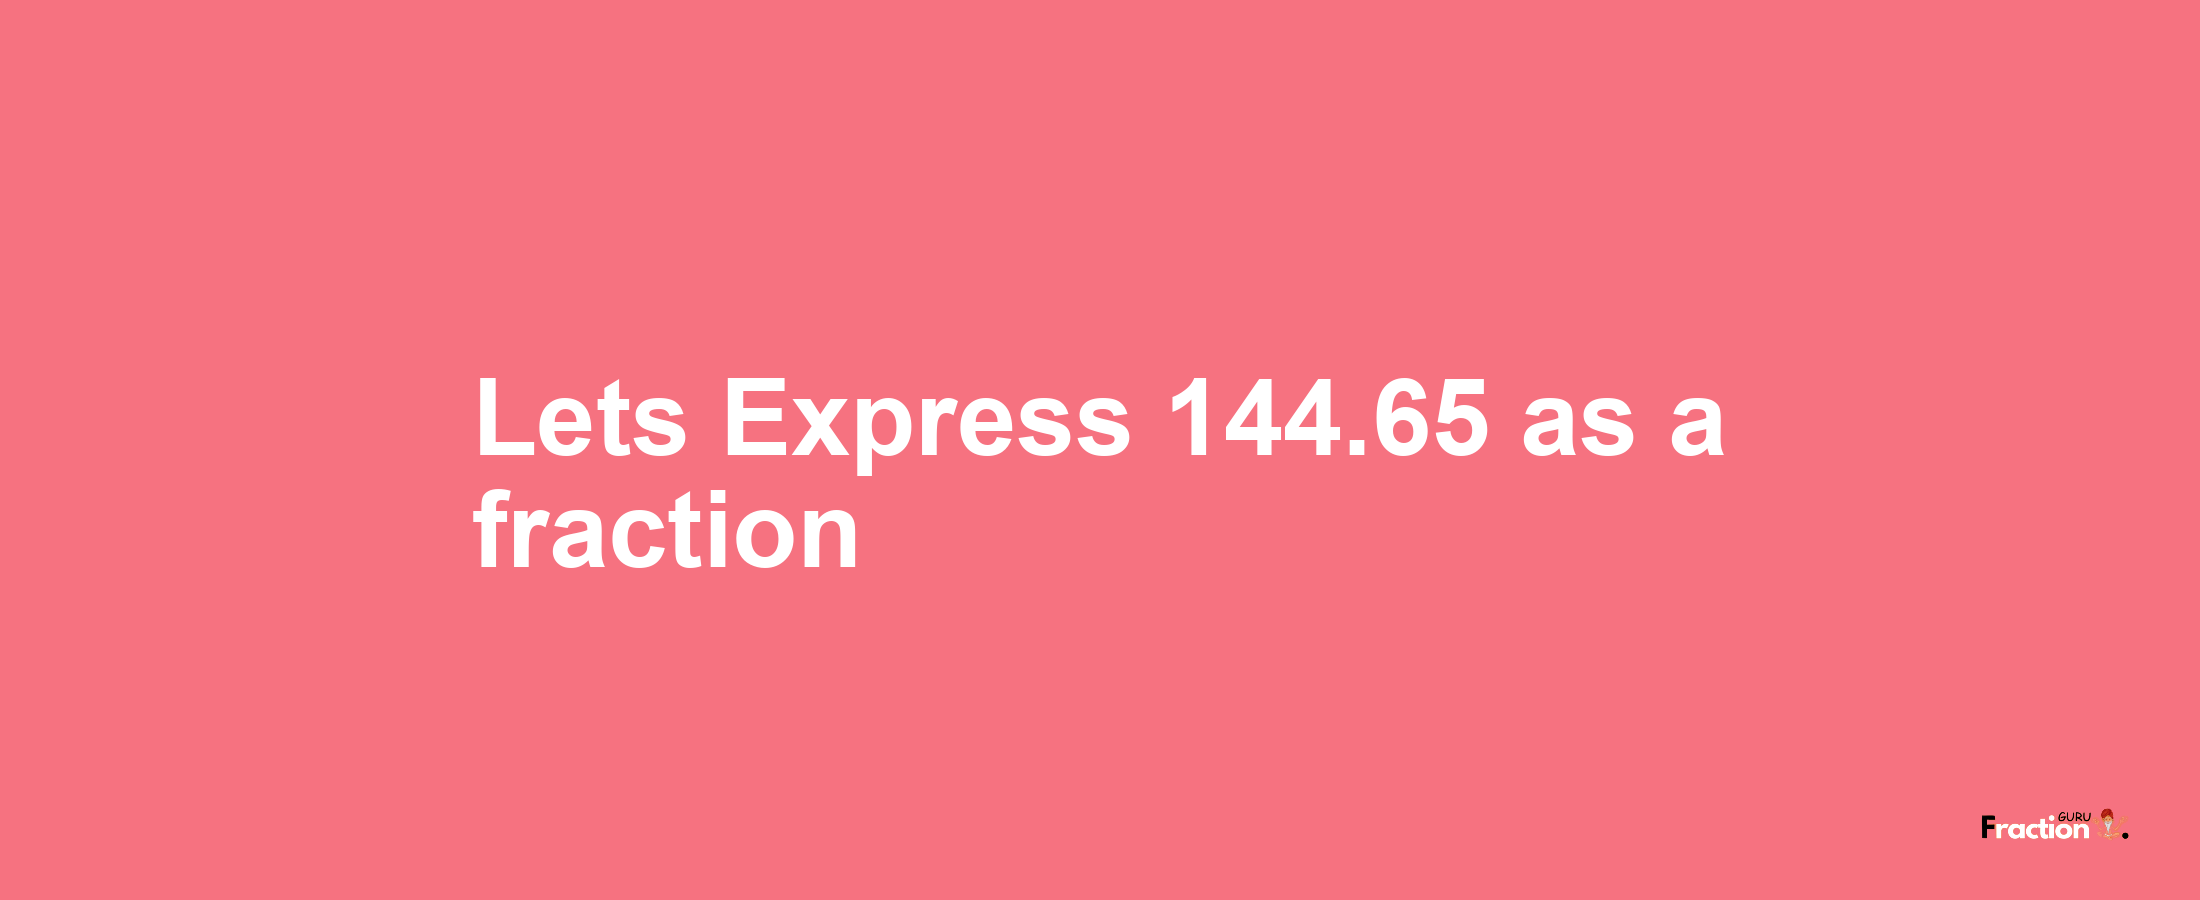 Lets Express 144.65 as afraction